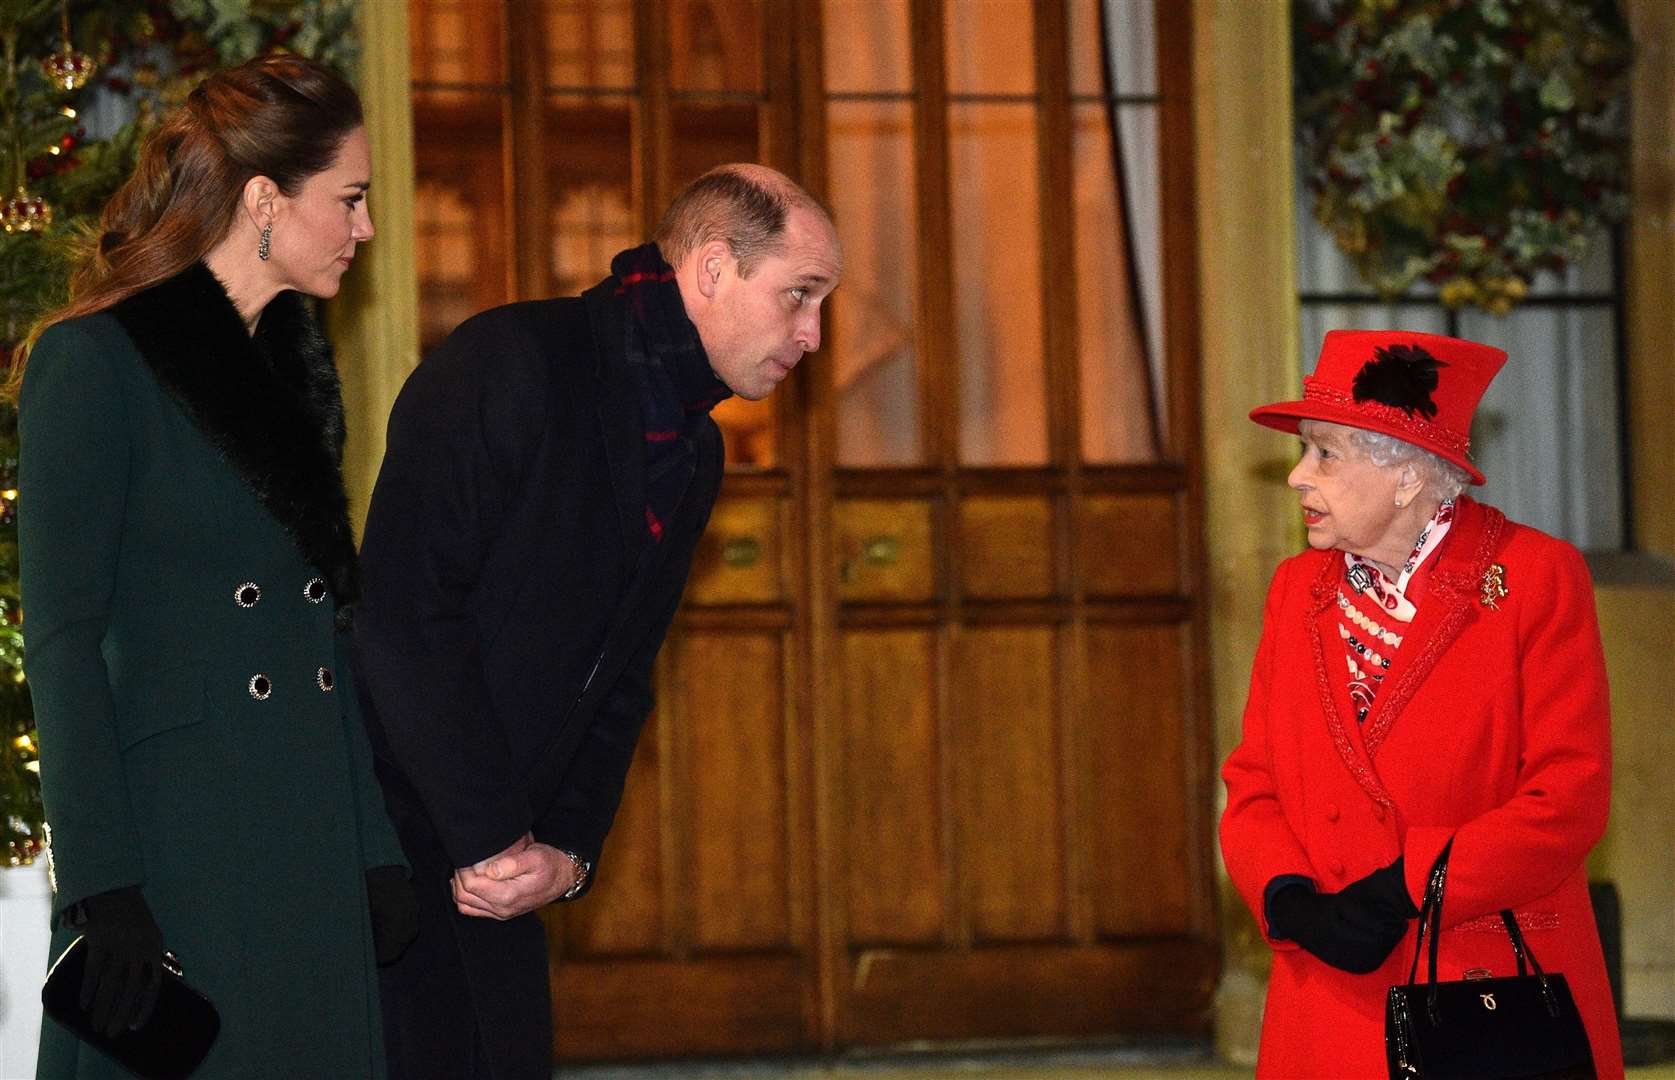 The Queen talks with the Duke and Duchess of Cambridge in the quadrangle at Windsor Castle (Glyn Kirk/PA)